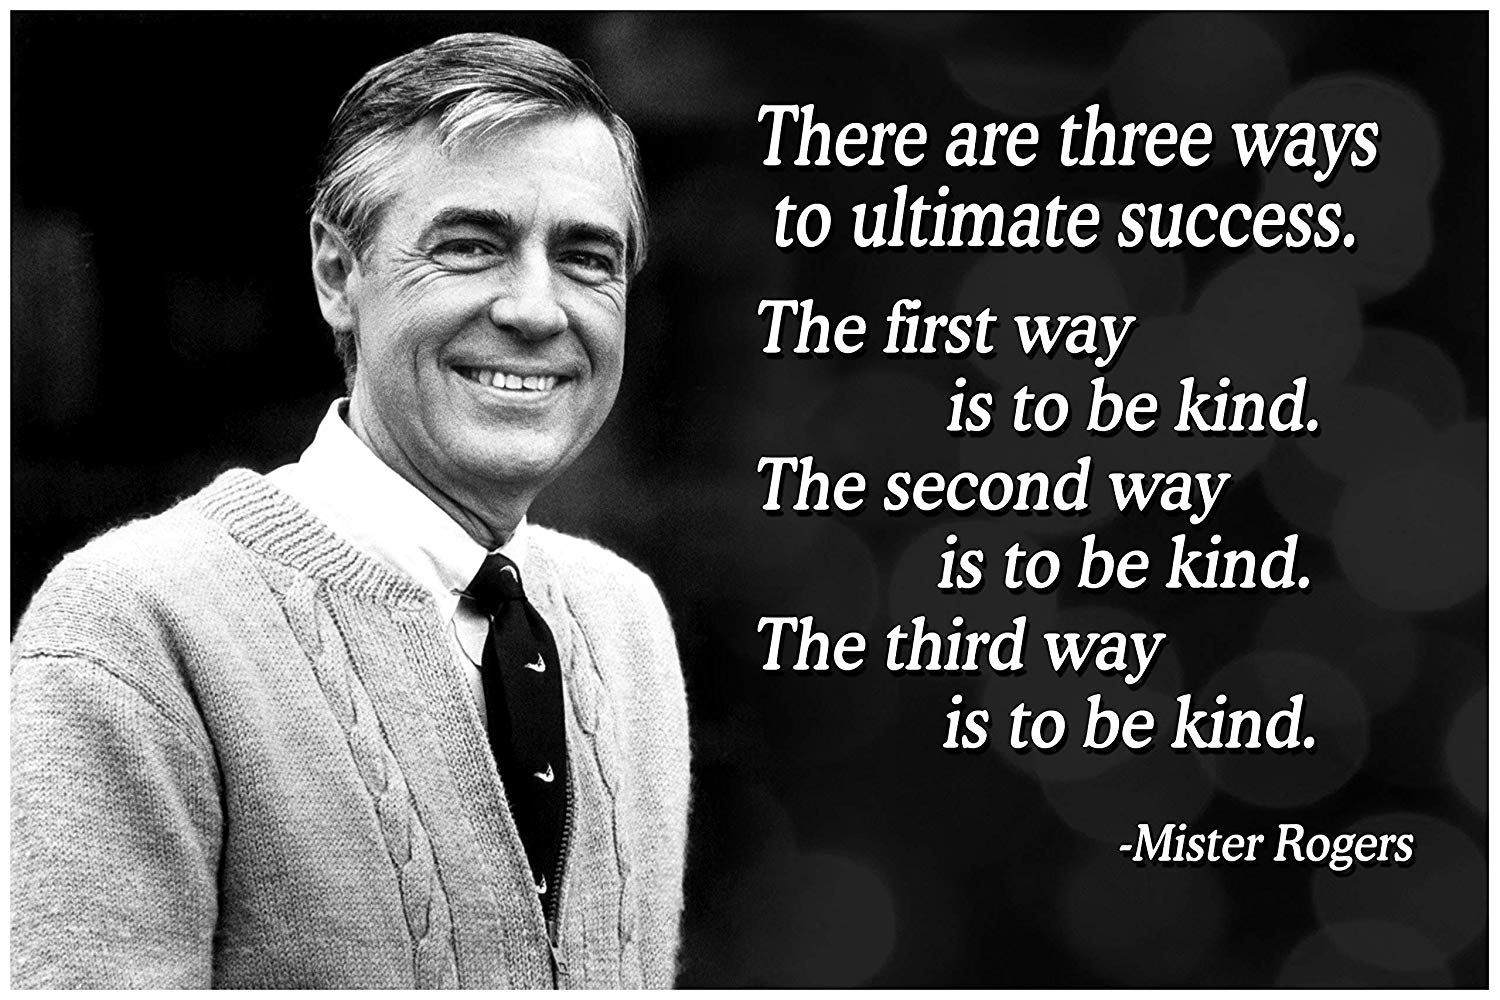 Rogers-3-ways-to-ultimate-success